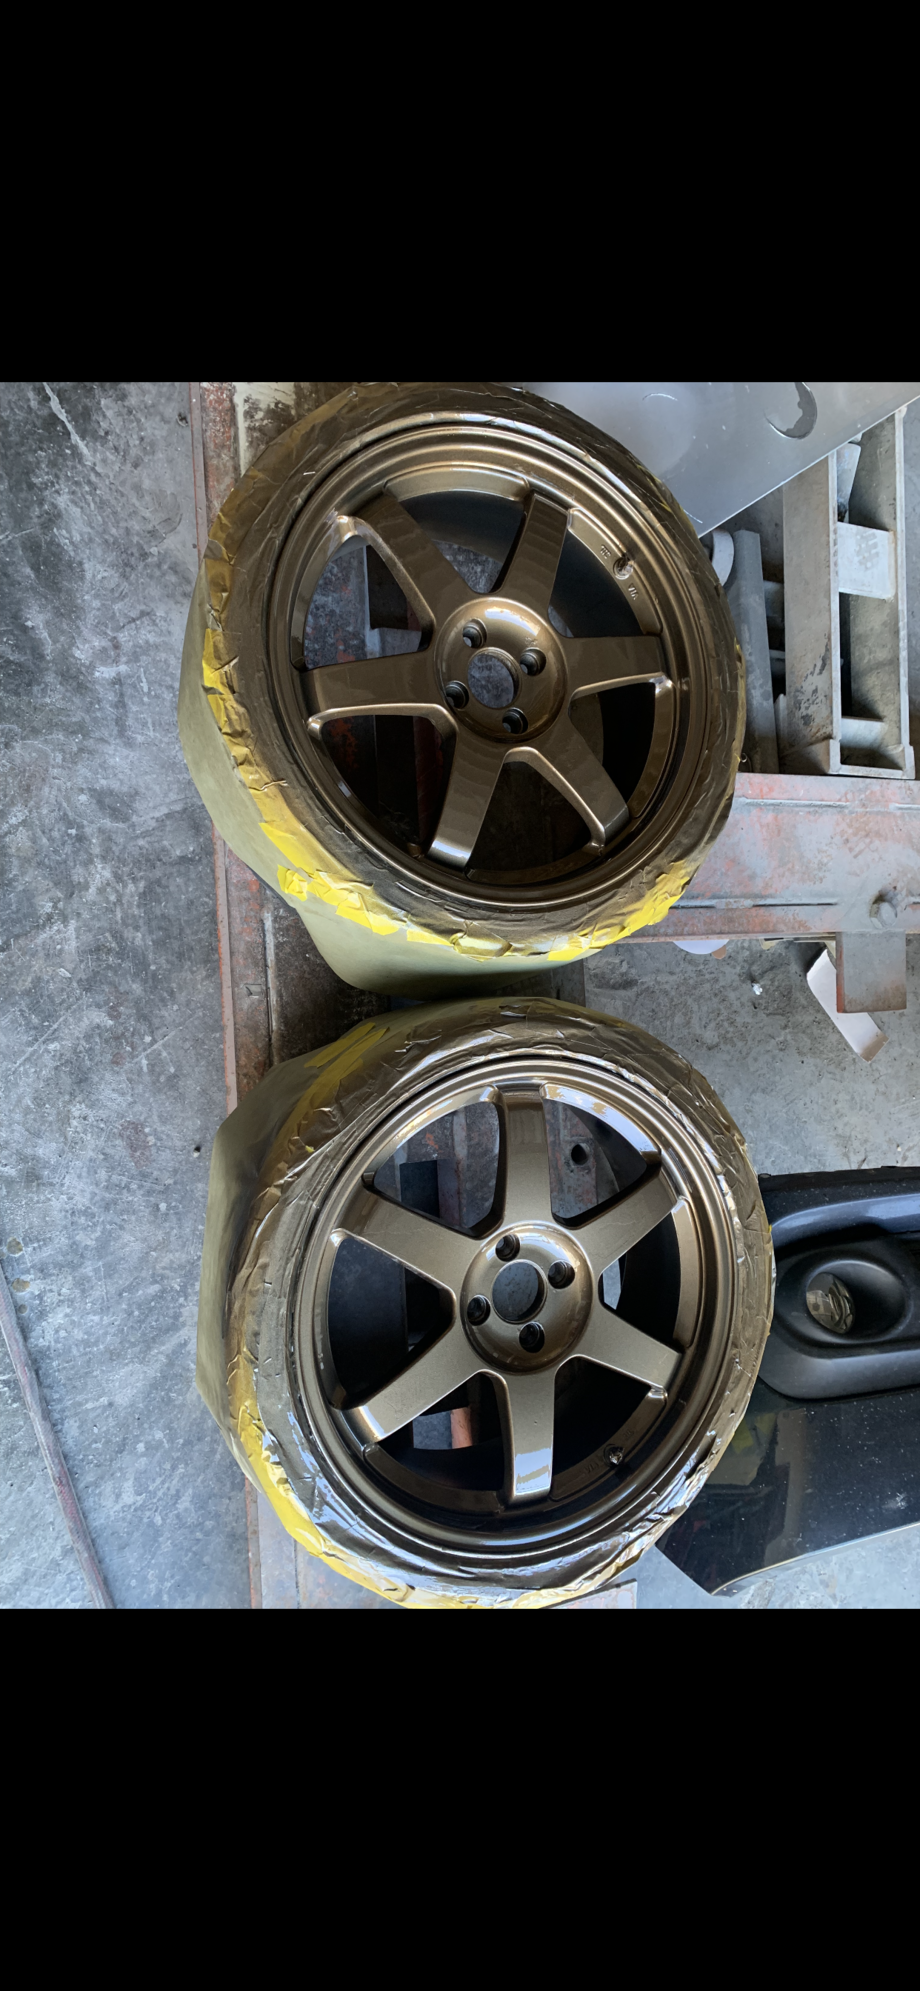 Wheels and Tires/Axles - Volk te37 18x7.5 4x100 215/40:18 Michellen  RARE - Used - 0  All Models - South San Francisco, CA 94080, United States